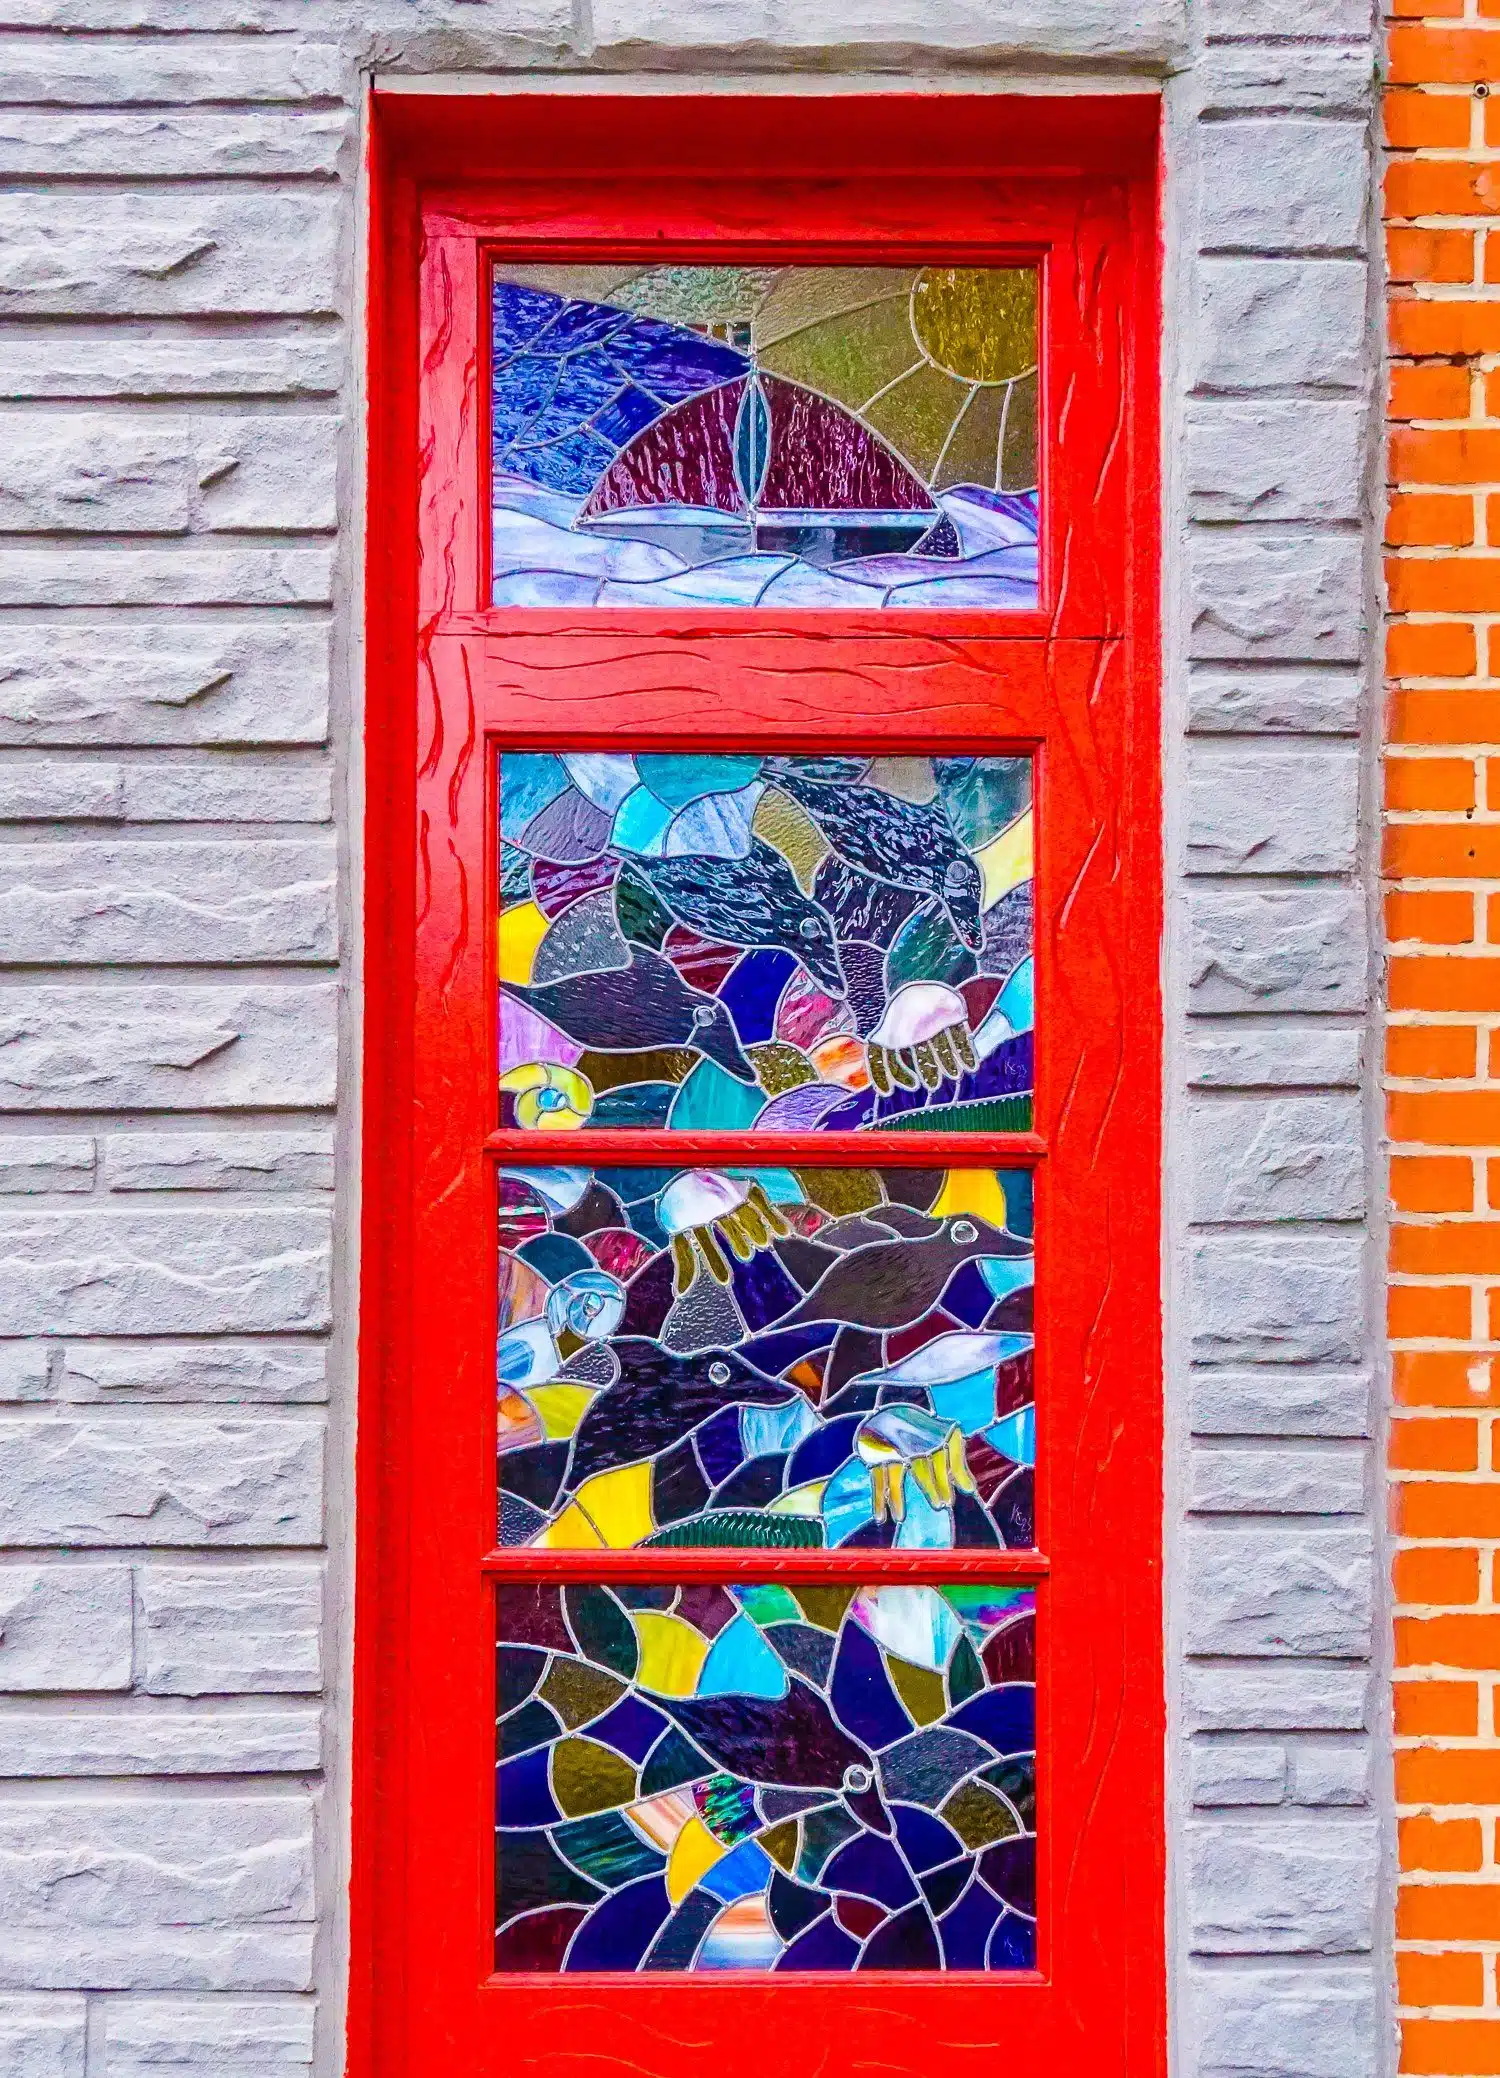 This beautiful red stained-glass door is a perfect example of why Fishtown, Philadelphia has some of the best public art in Philly!